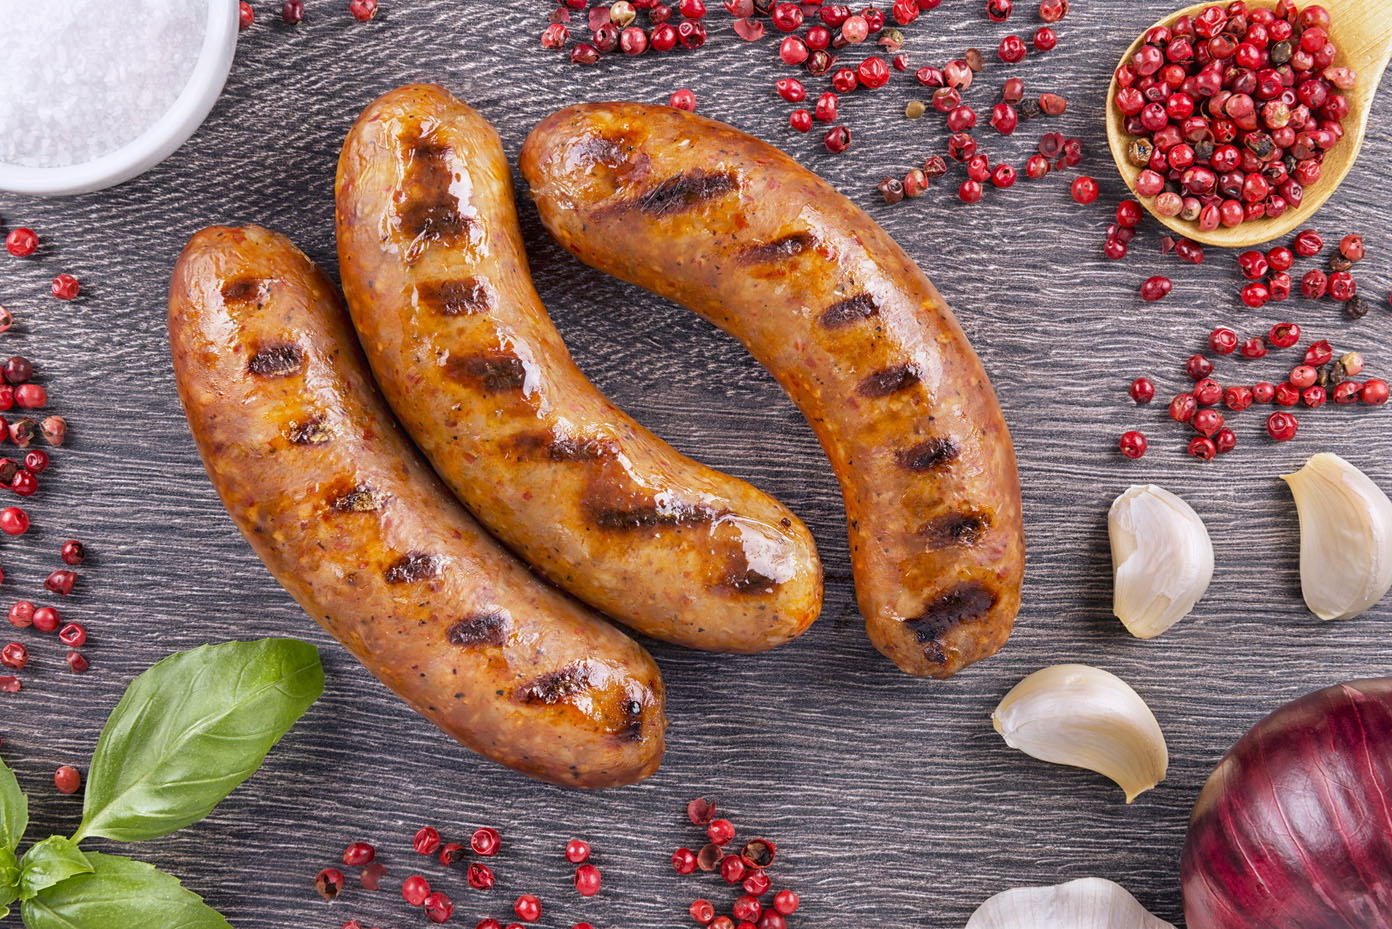 📷 Choose Between Normal or Pinterest Foods and We’ll Reveal If You Have a Male or Female Brain Grilled sausages